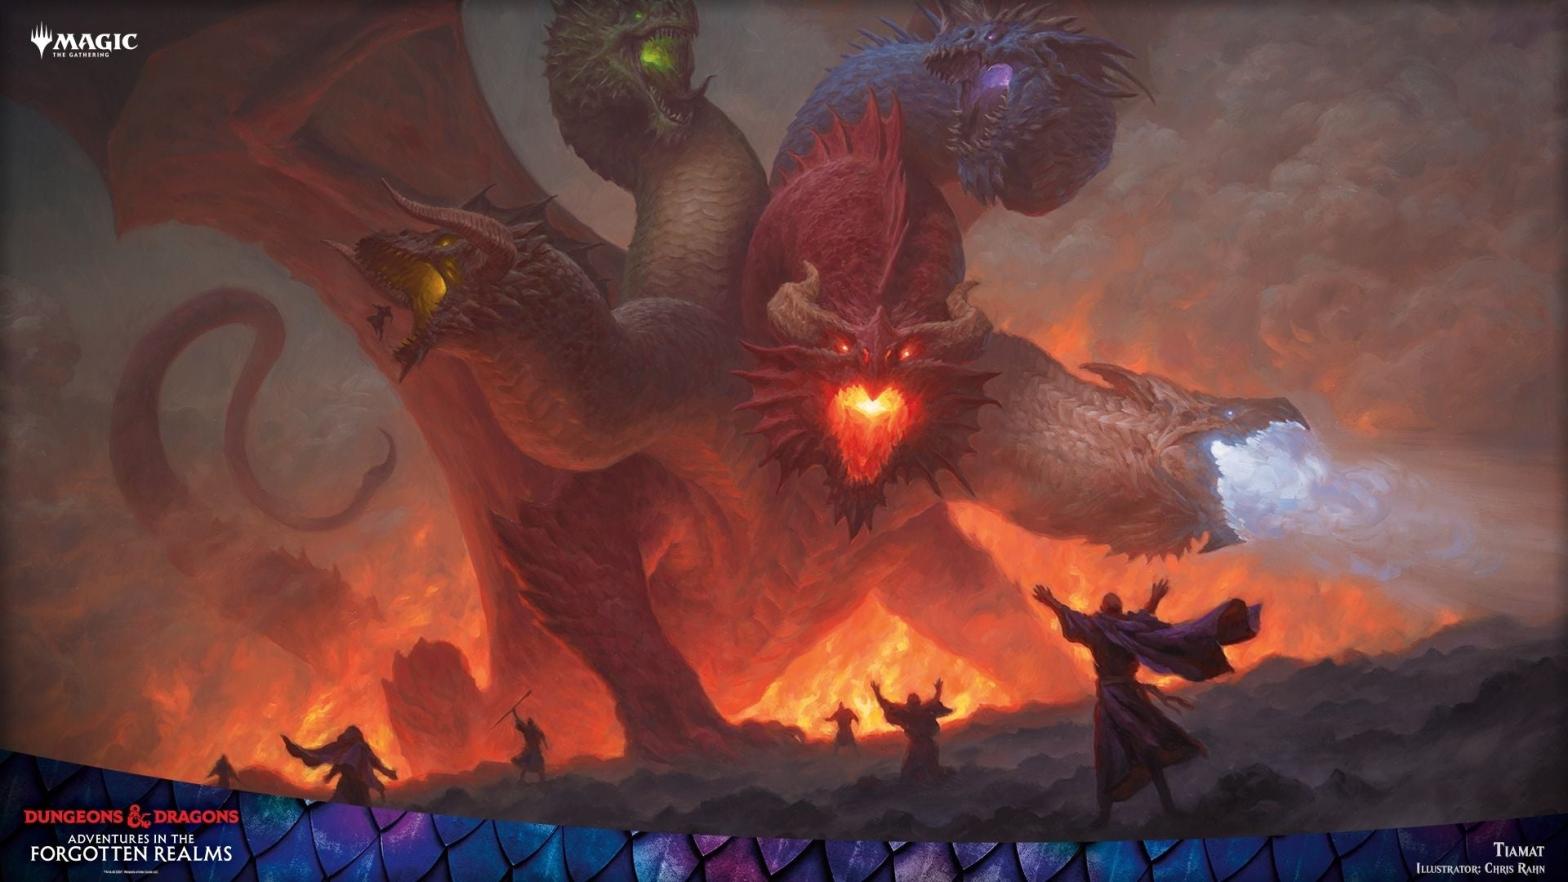 Tiamat is one of the Legendary creature cards in Magic's latest D&D-themed set. (Image: Wizards of the Coast / Chris Rahn)